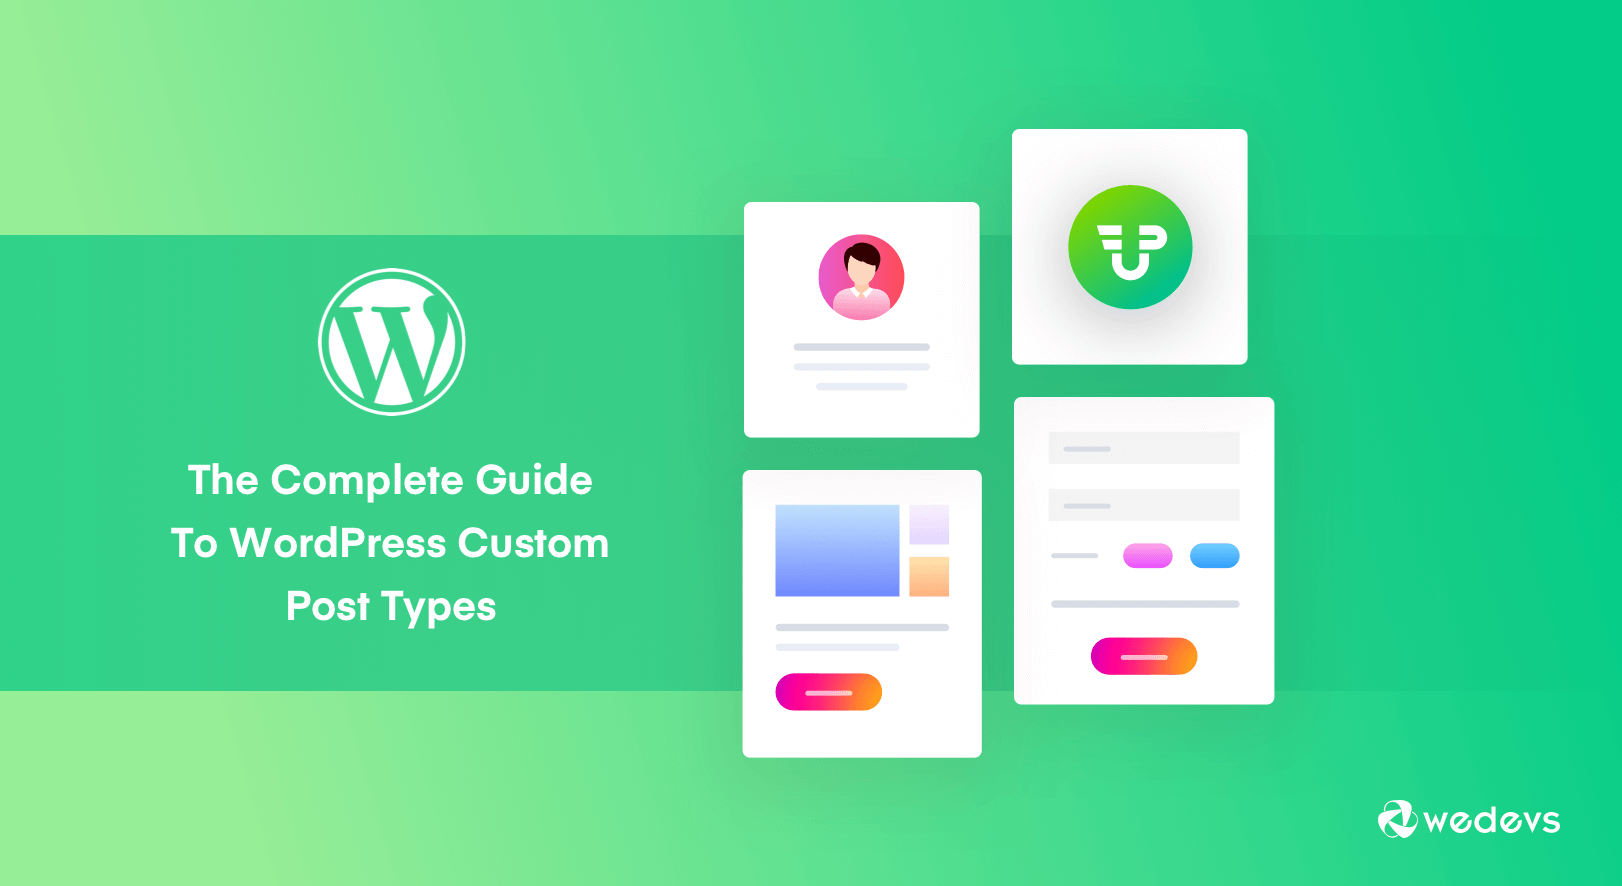 The Complete Guide To WordPress Custom Post Types